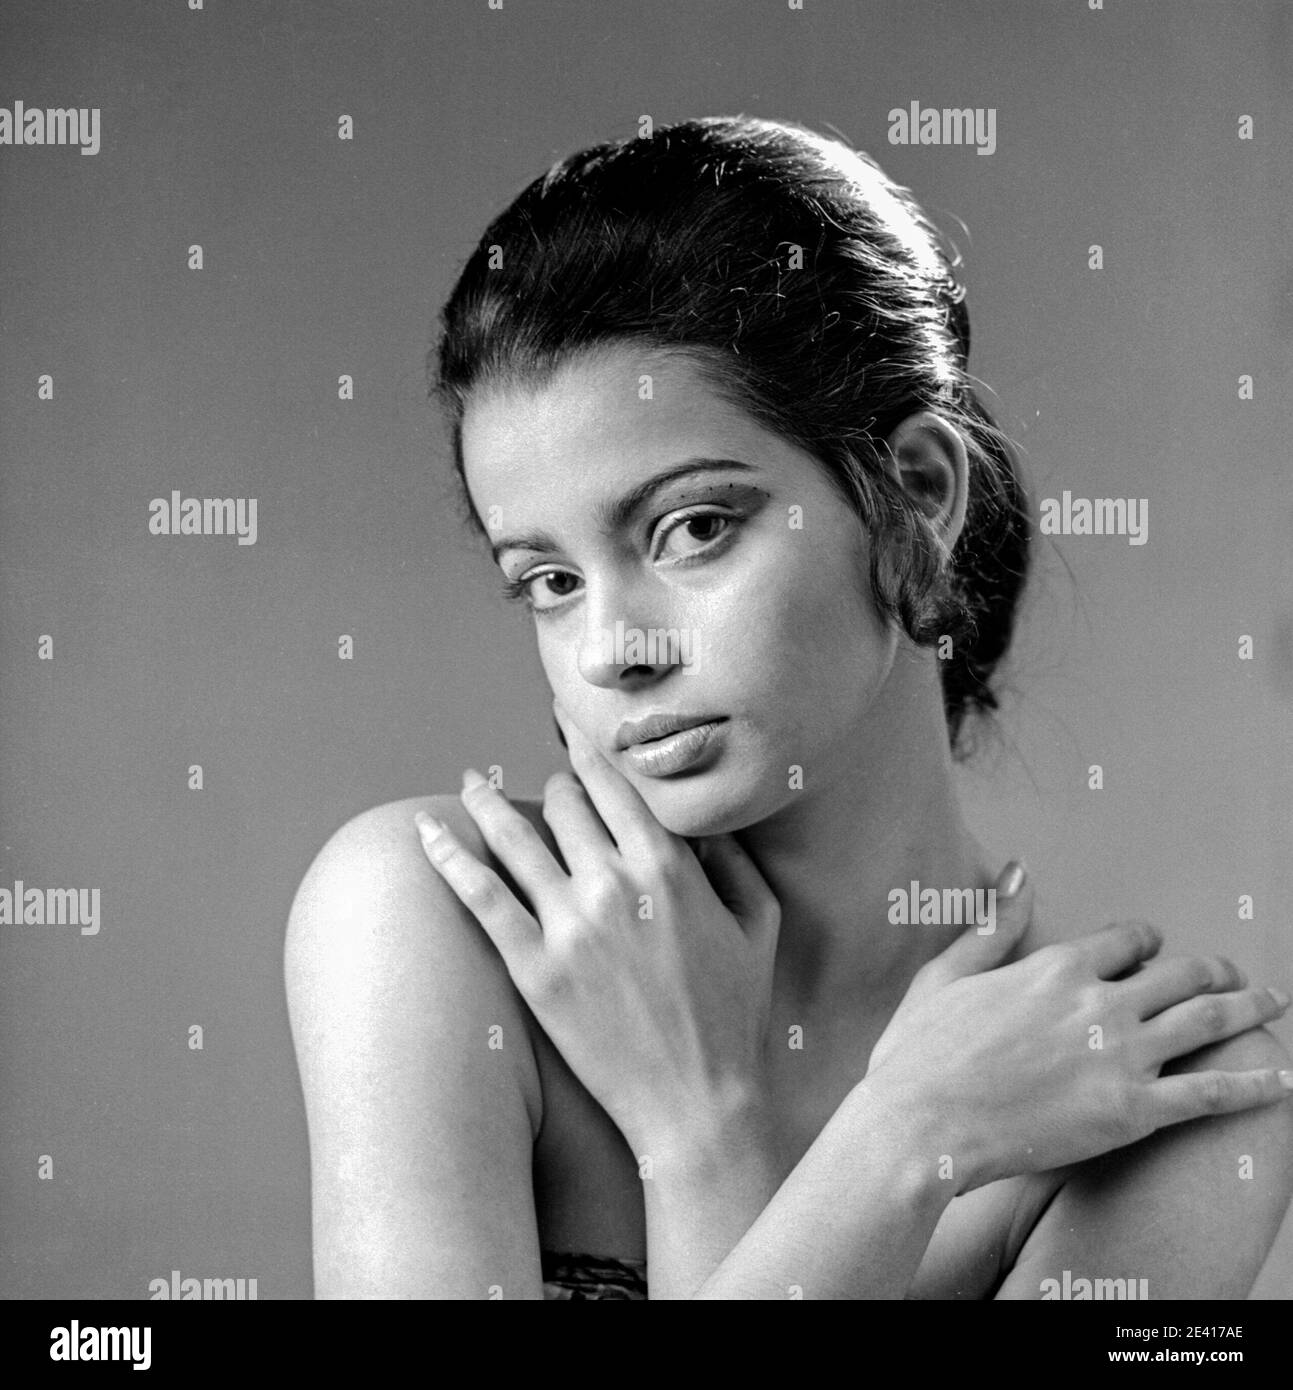 The Indian Bollywood actress, model, Miss India and Hollywood star, Persis Khambatta in her modelling days in the 1960s. She played Lieutenant Ilia in Star Trek: The Motion Picture, Stock Photo